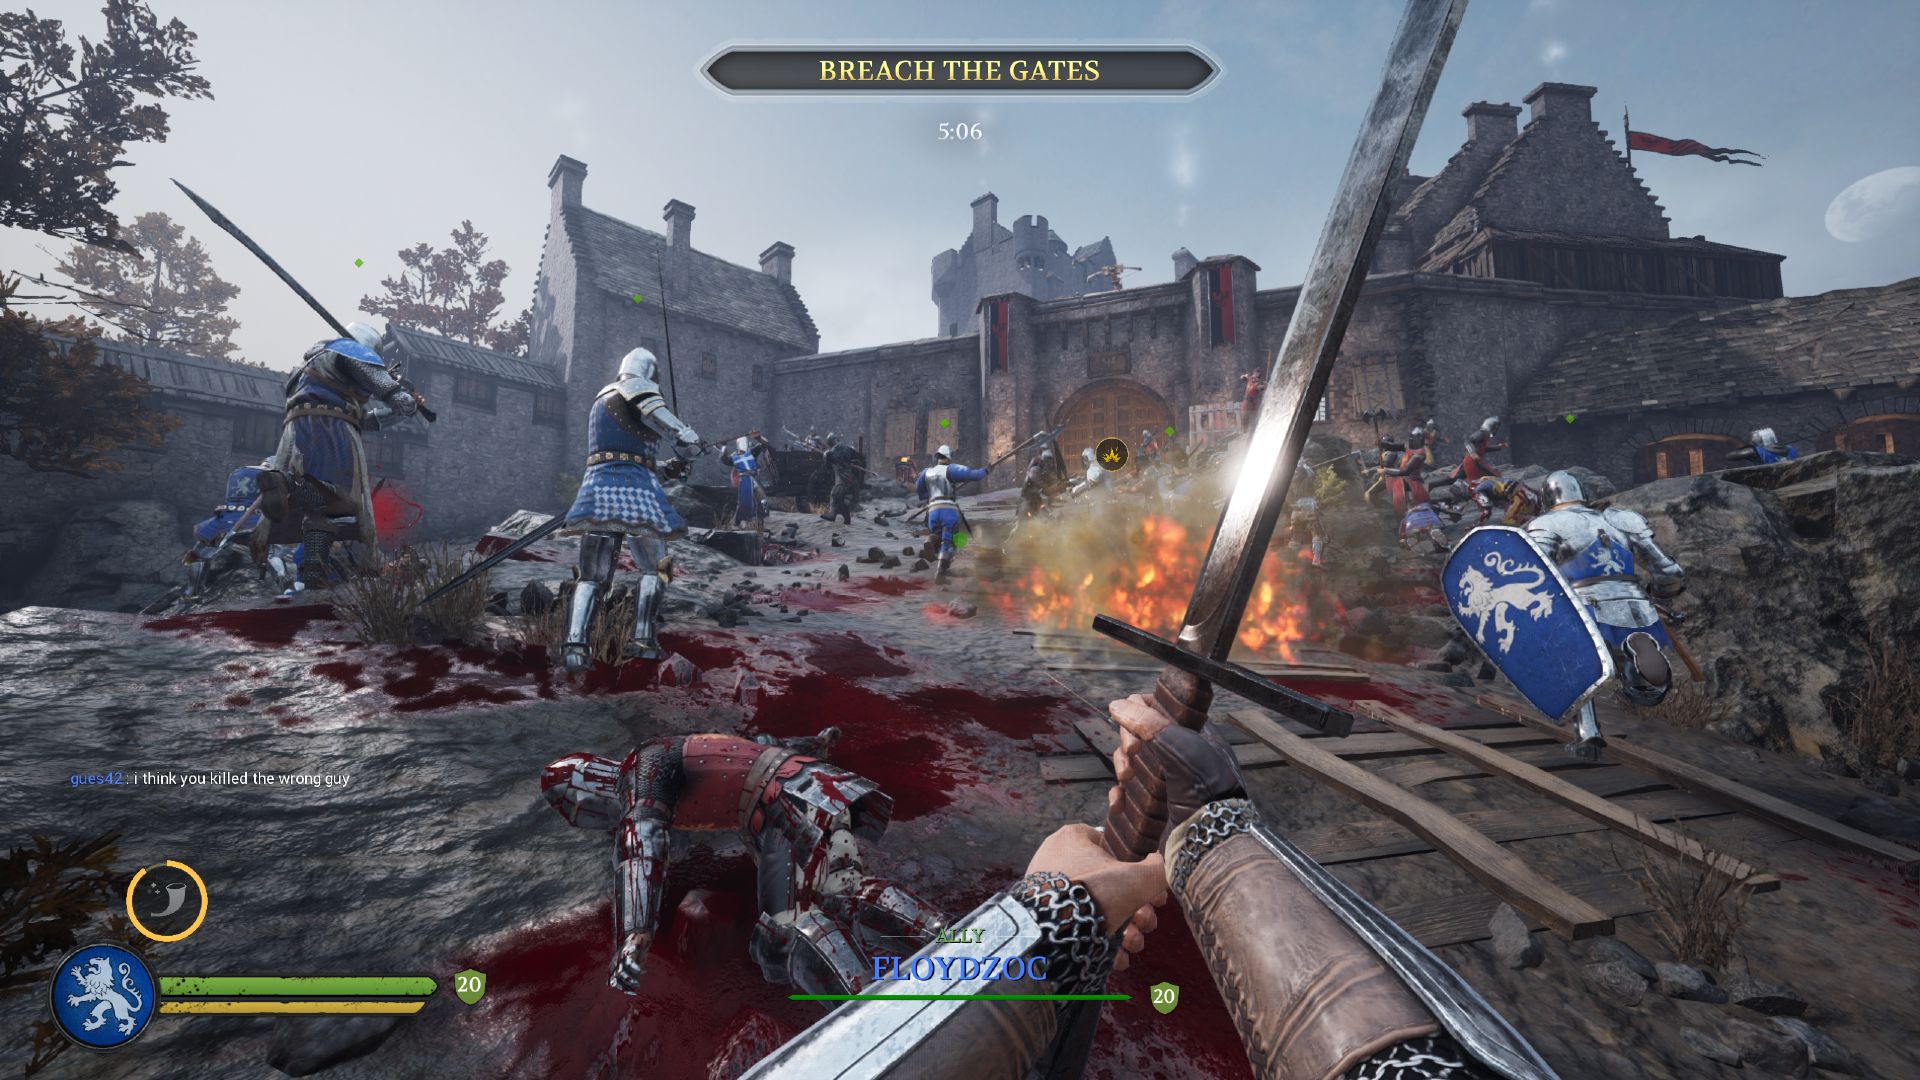 chivalry-2-review-breach-the-gates.jpg